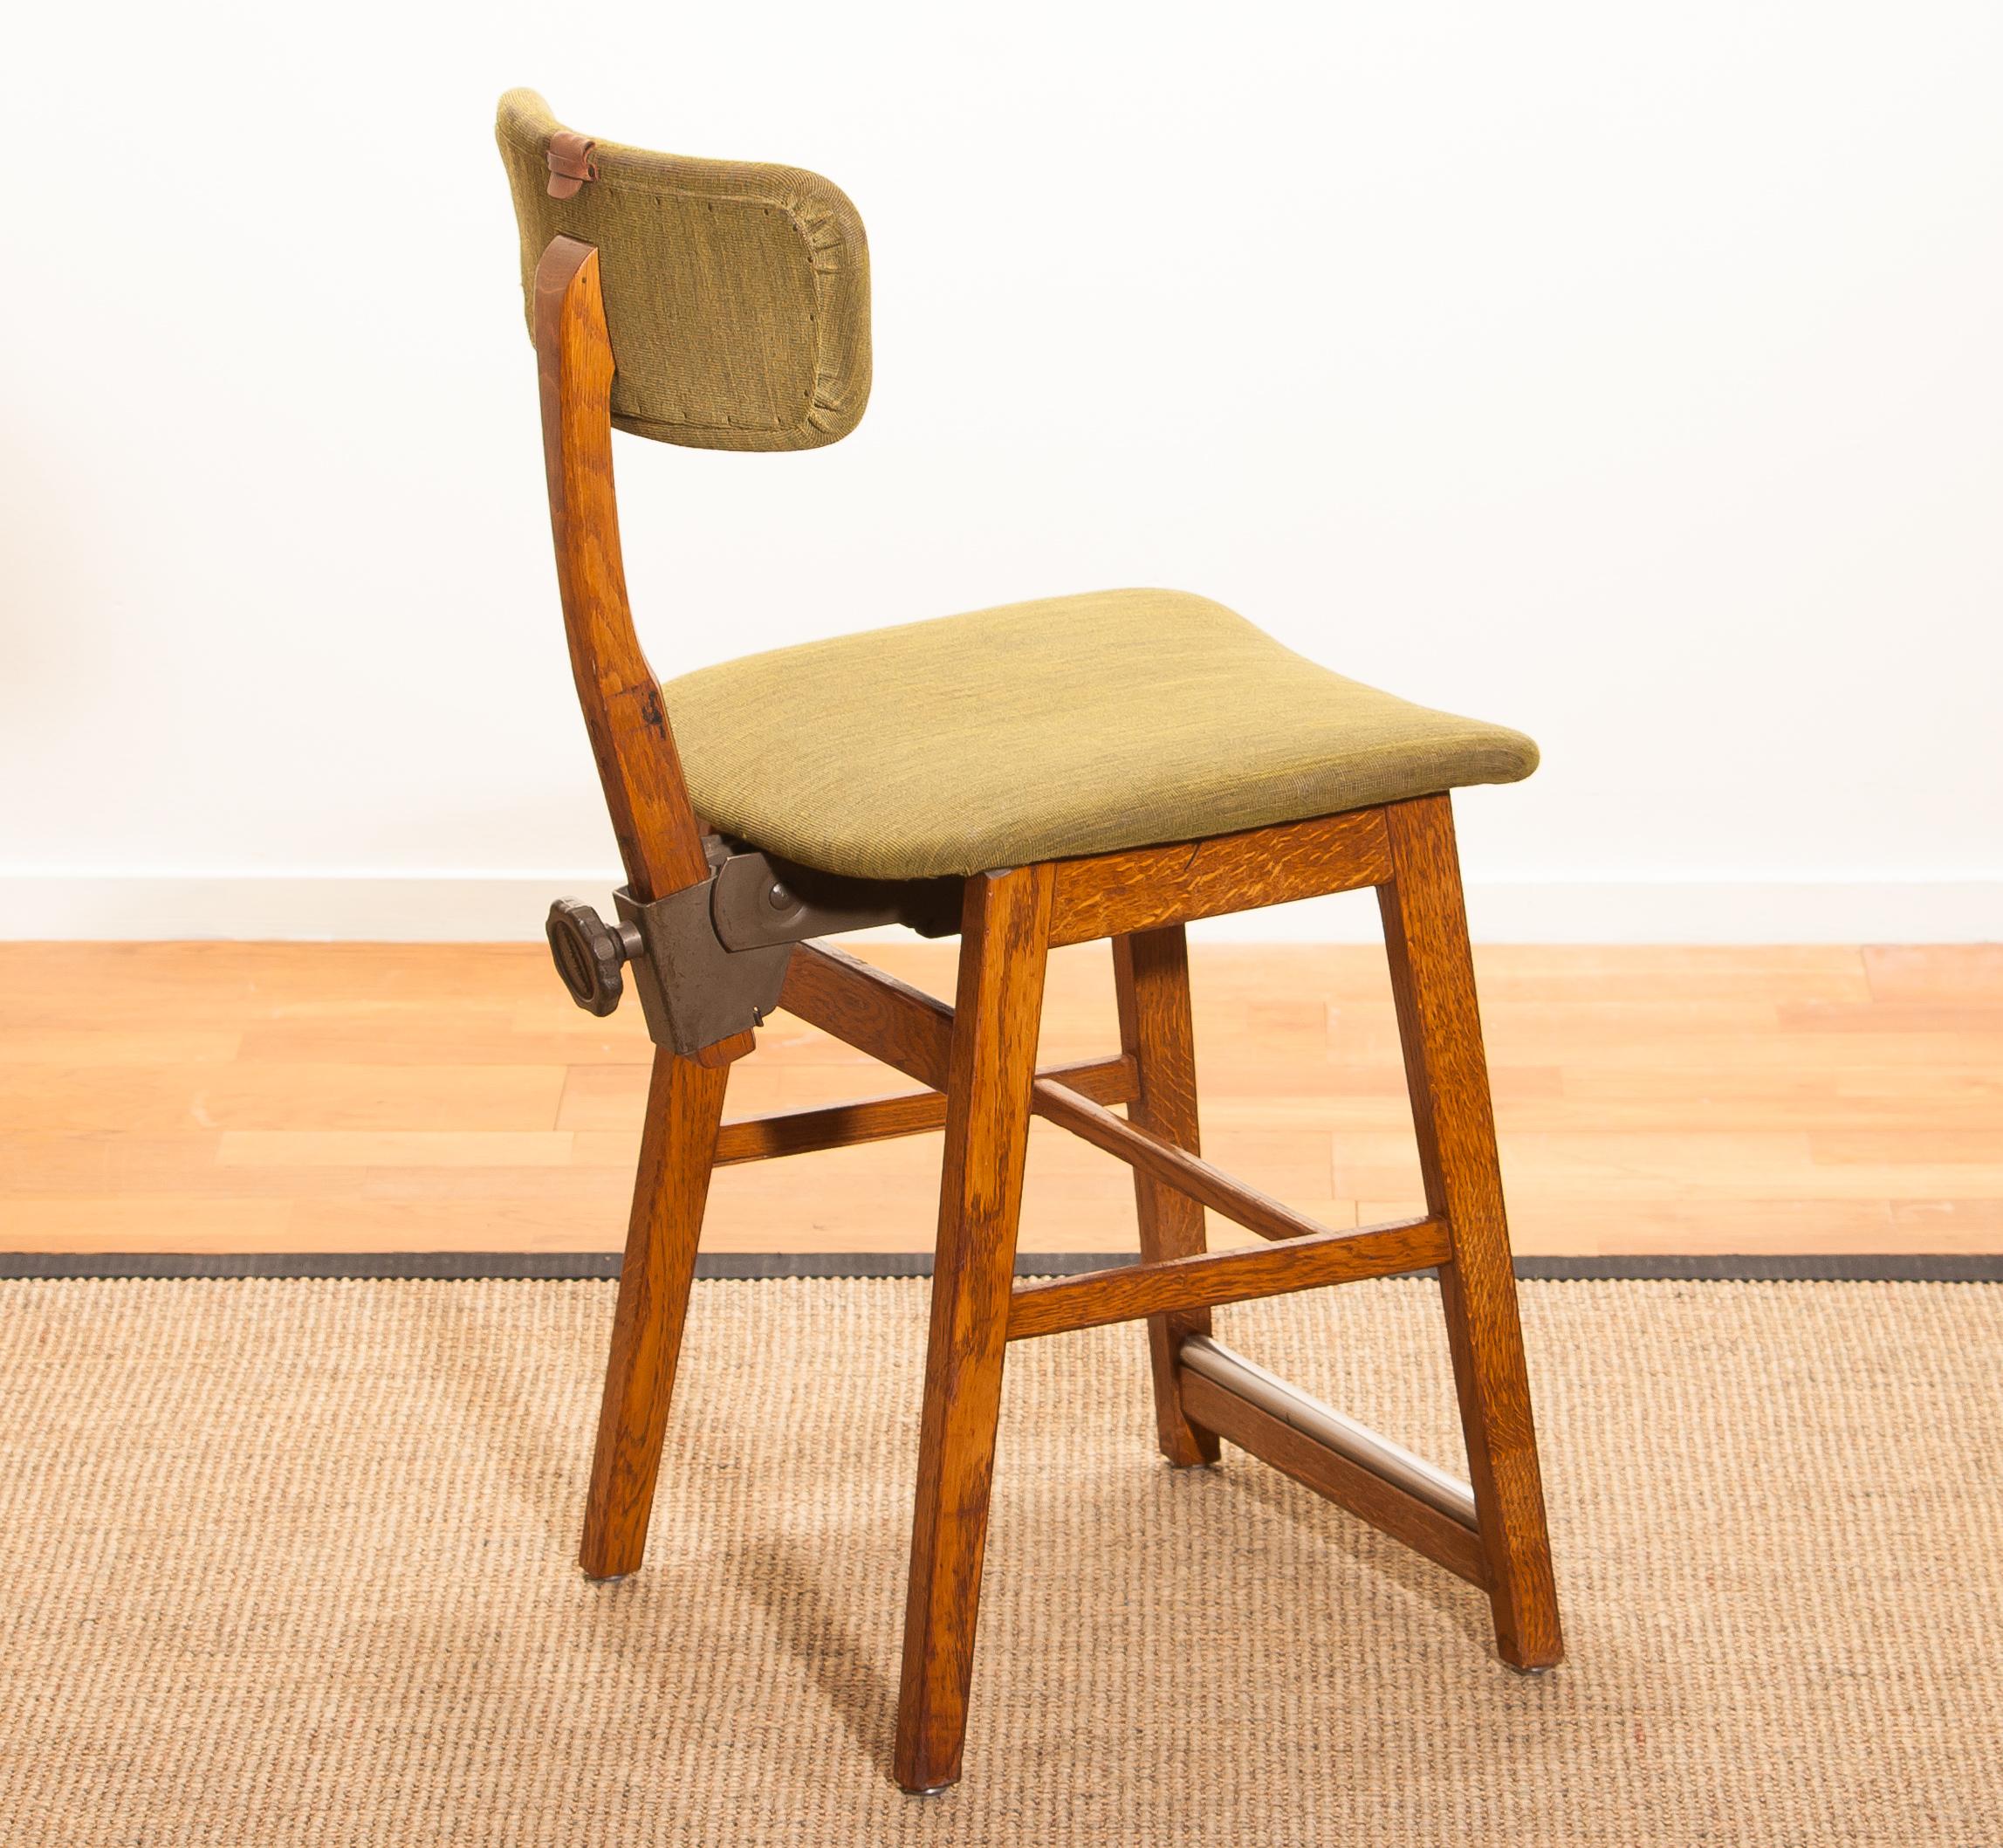 1940s, Oak and Wool Desk Chair by Âtvidabergs, Sweden 2